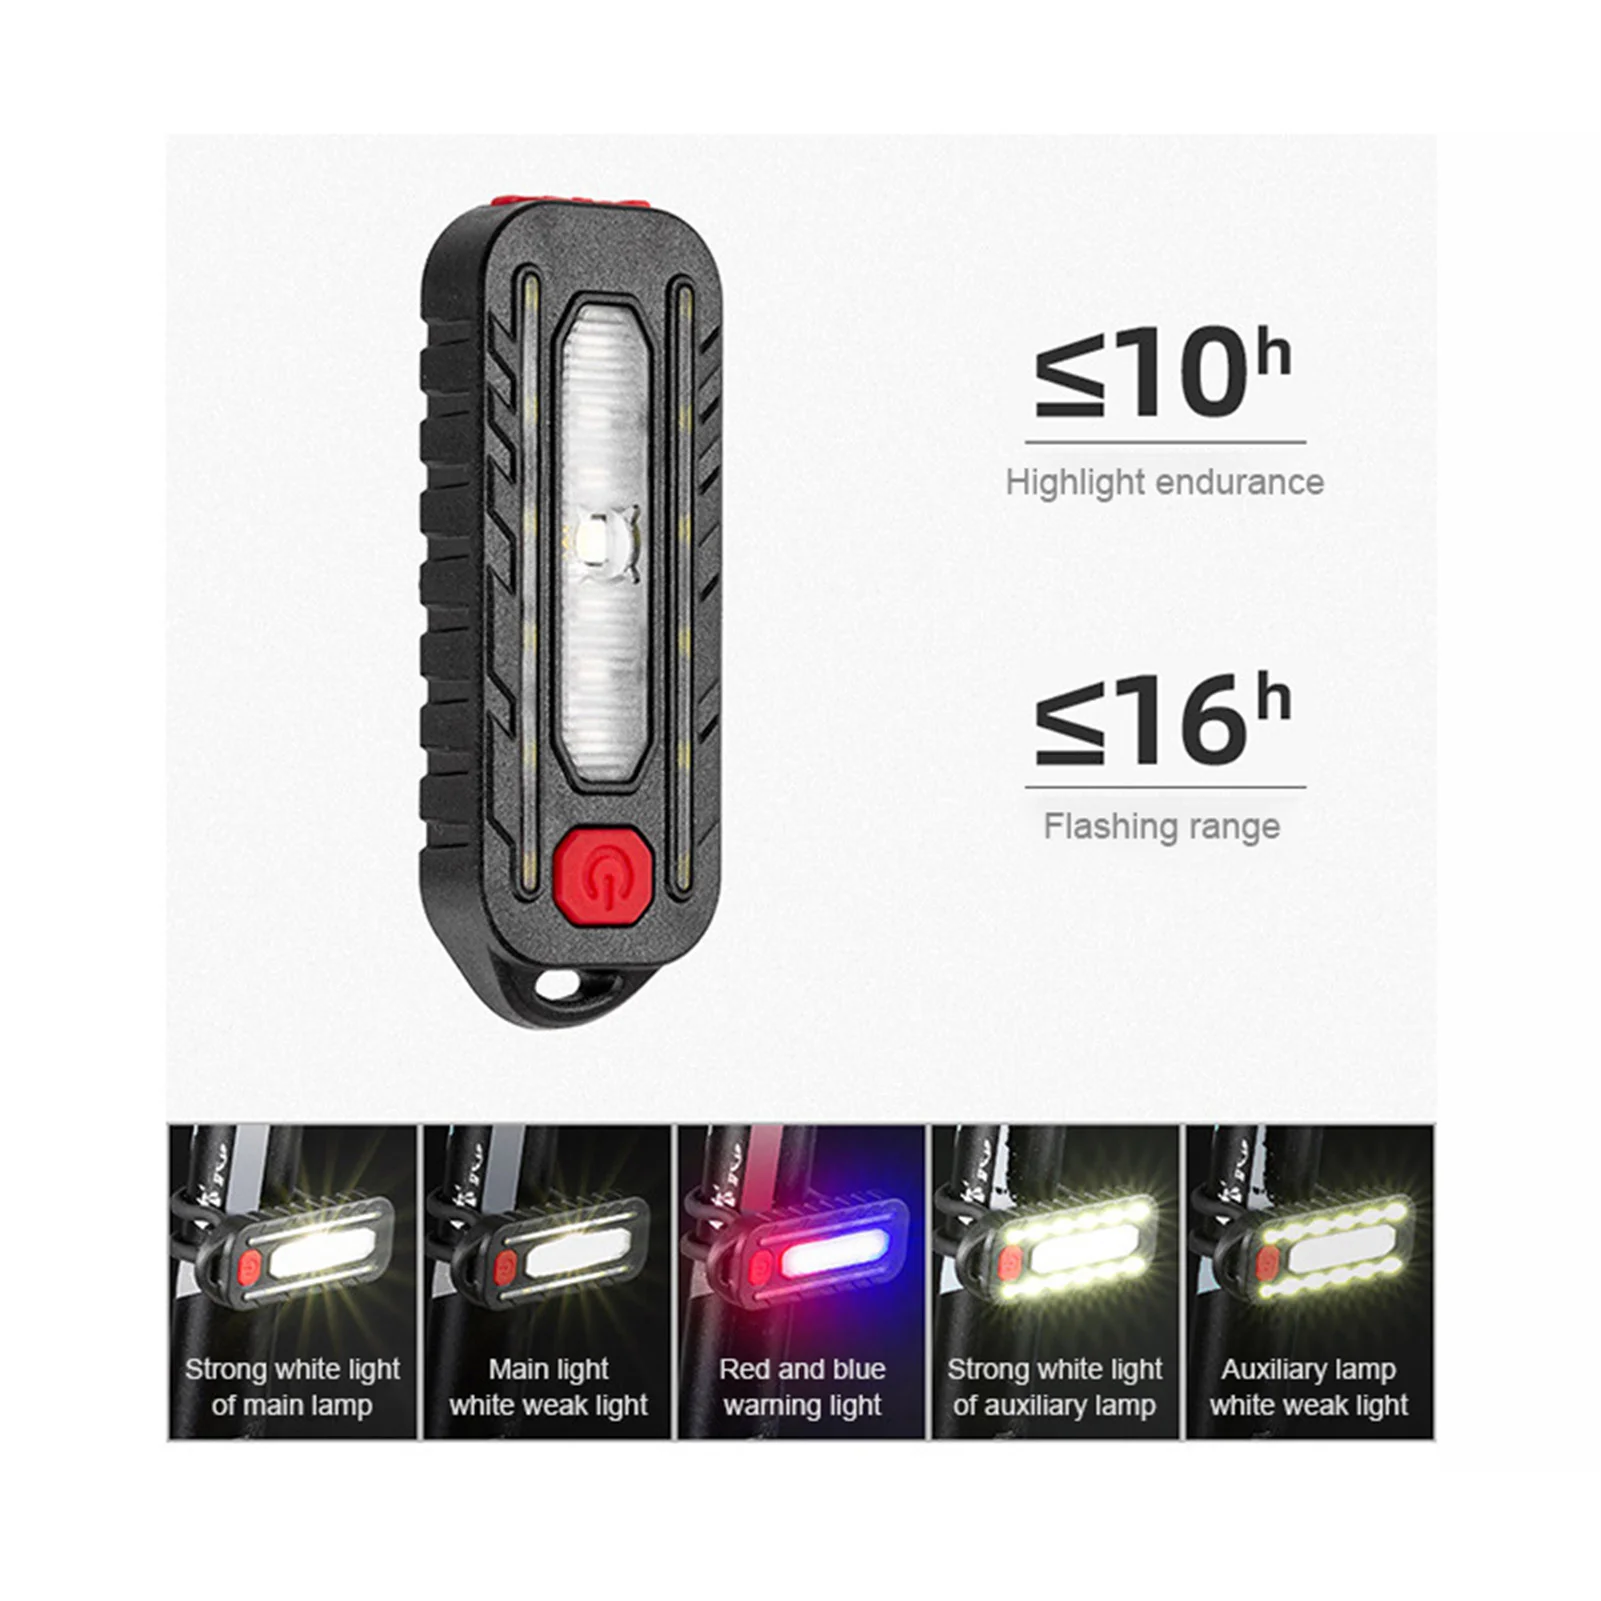 LED Police Light Bicycle Tail Light Shoulder Clip Safety Warning Light USB Rechargeable Waterproof Lamps Bike Accessories